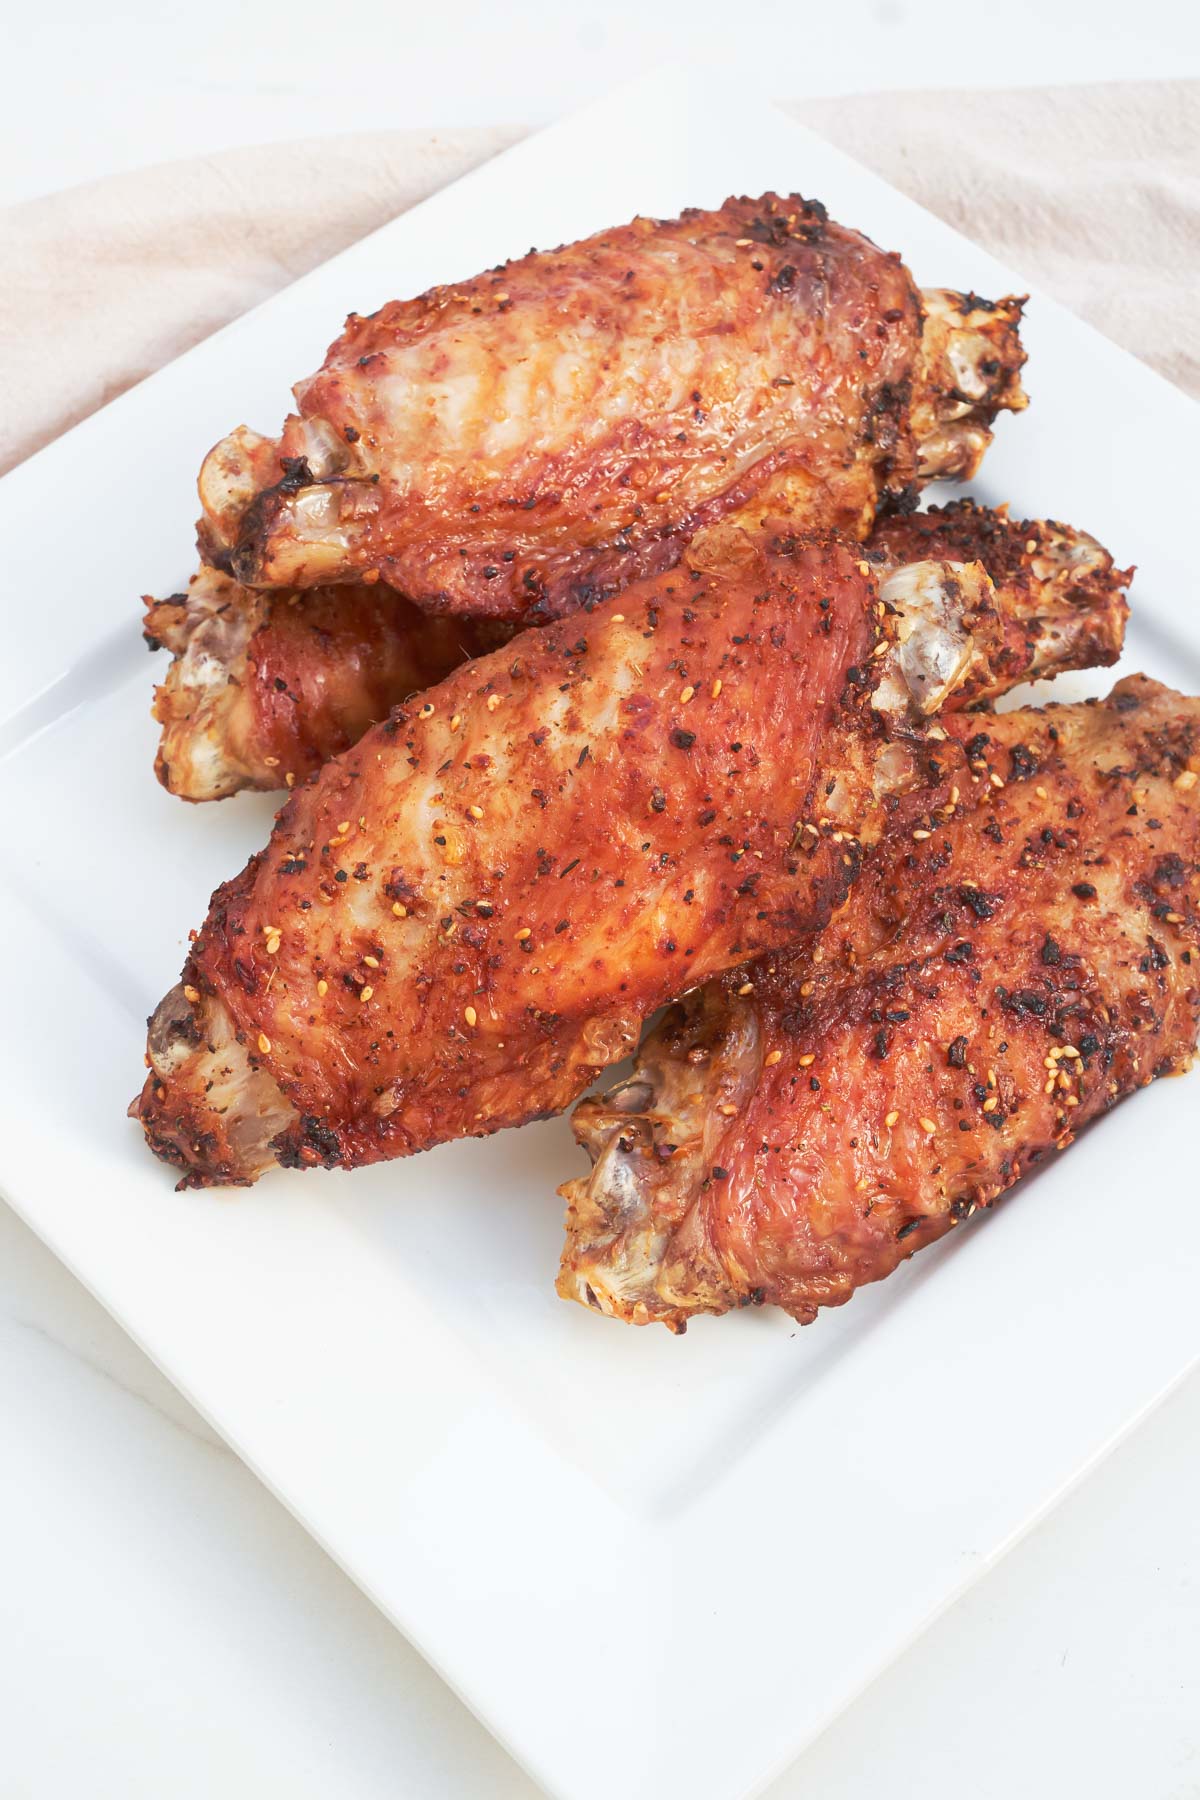 the completed air fryer turkey wings served on a white plate